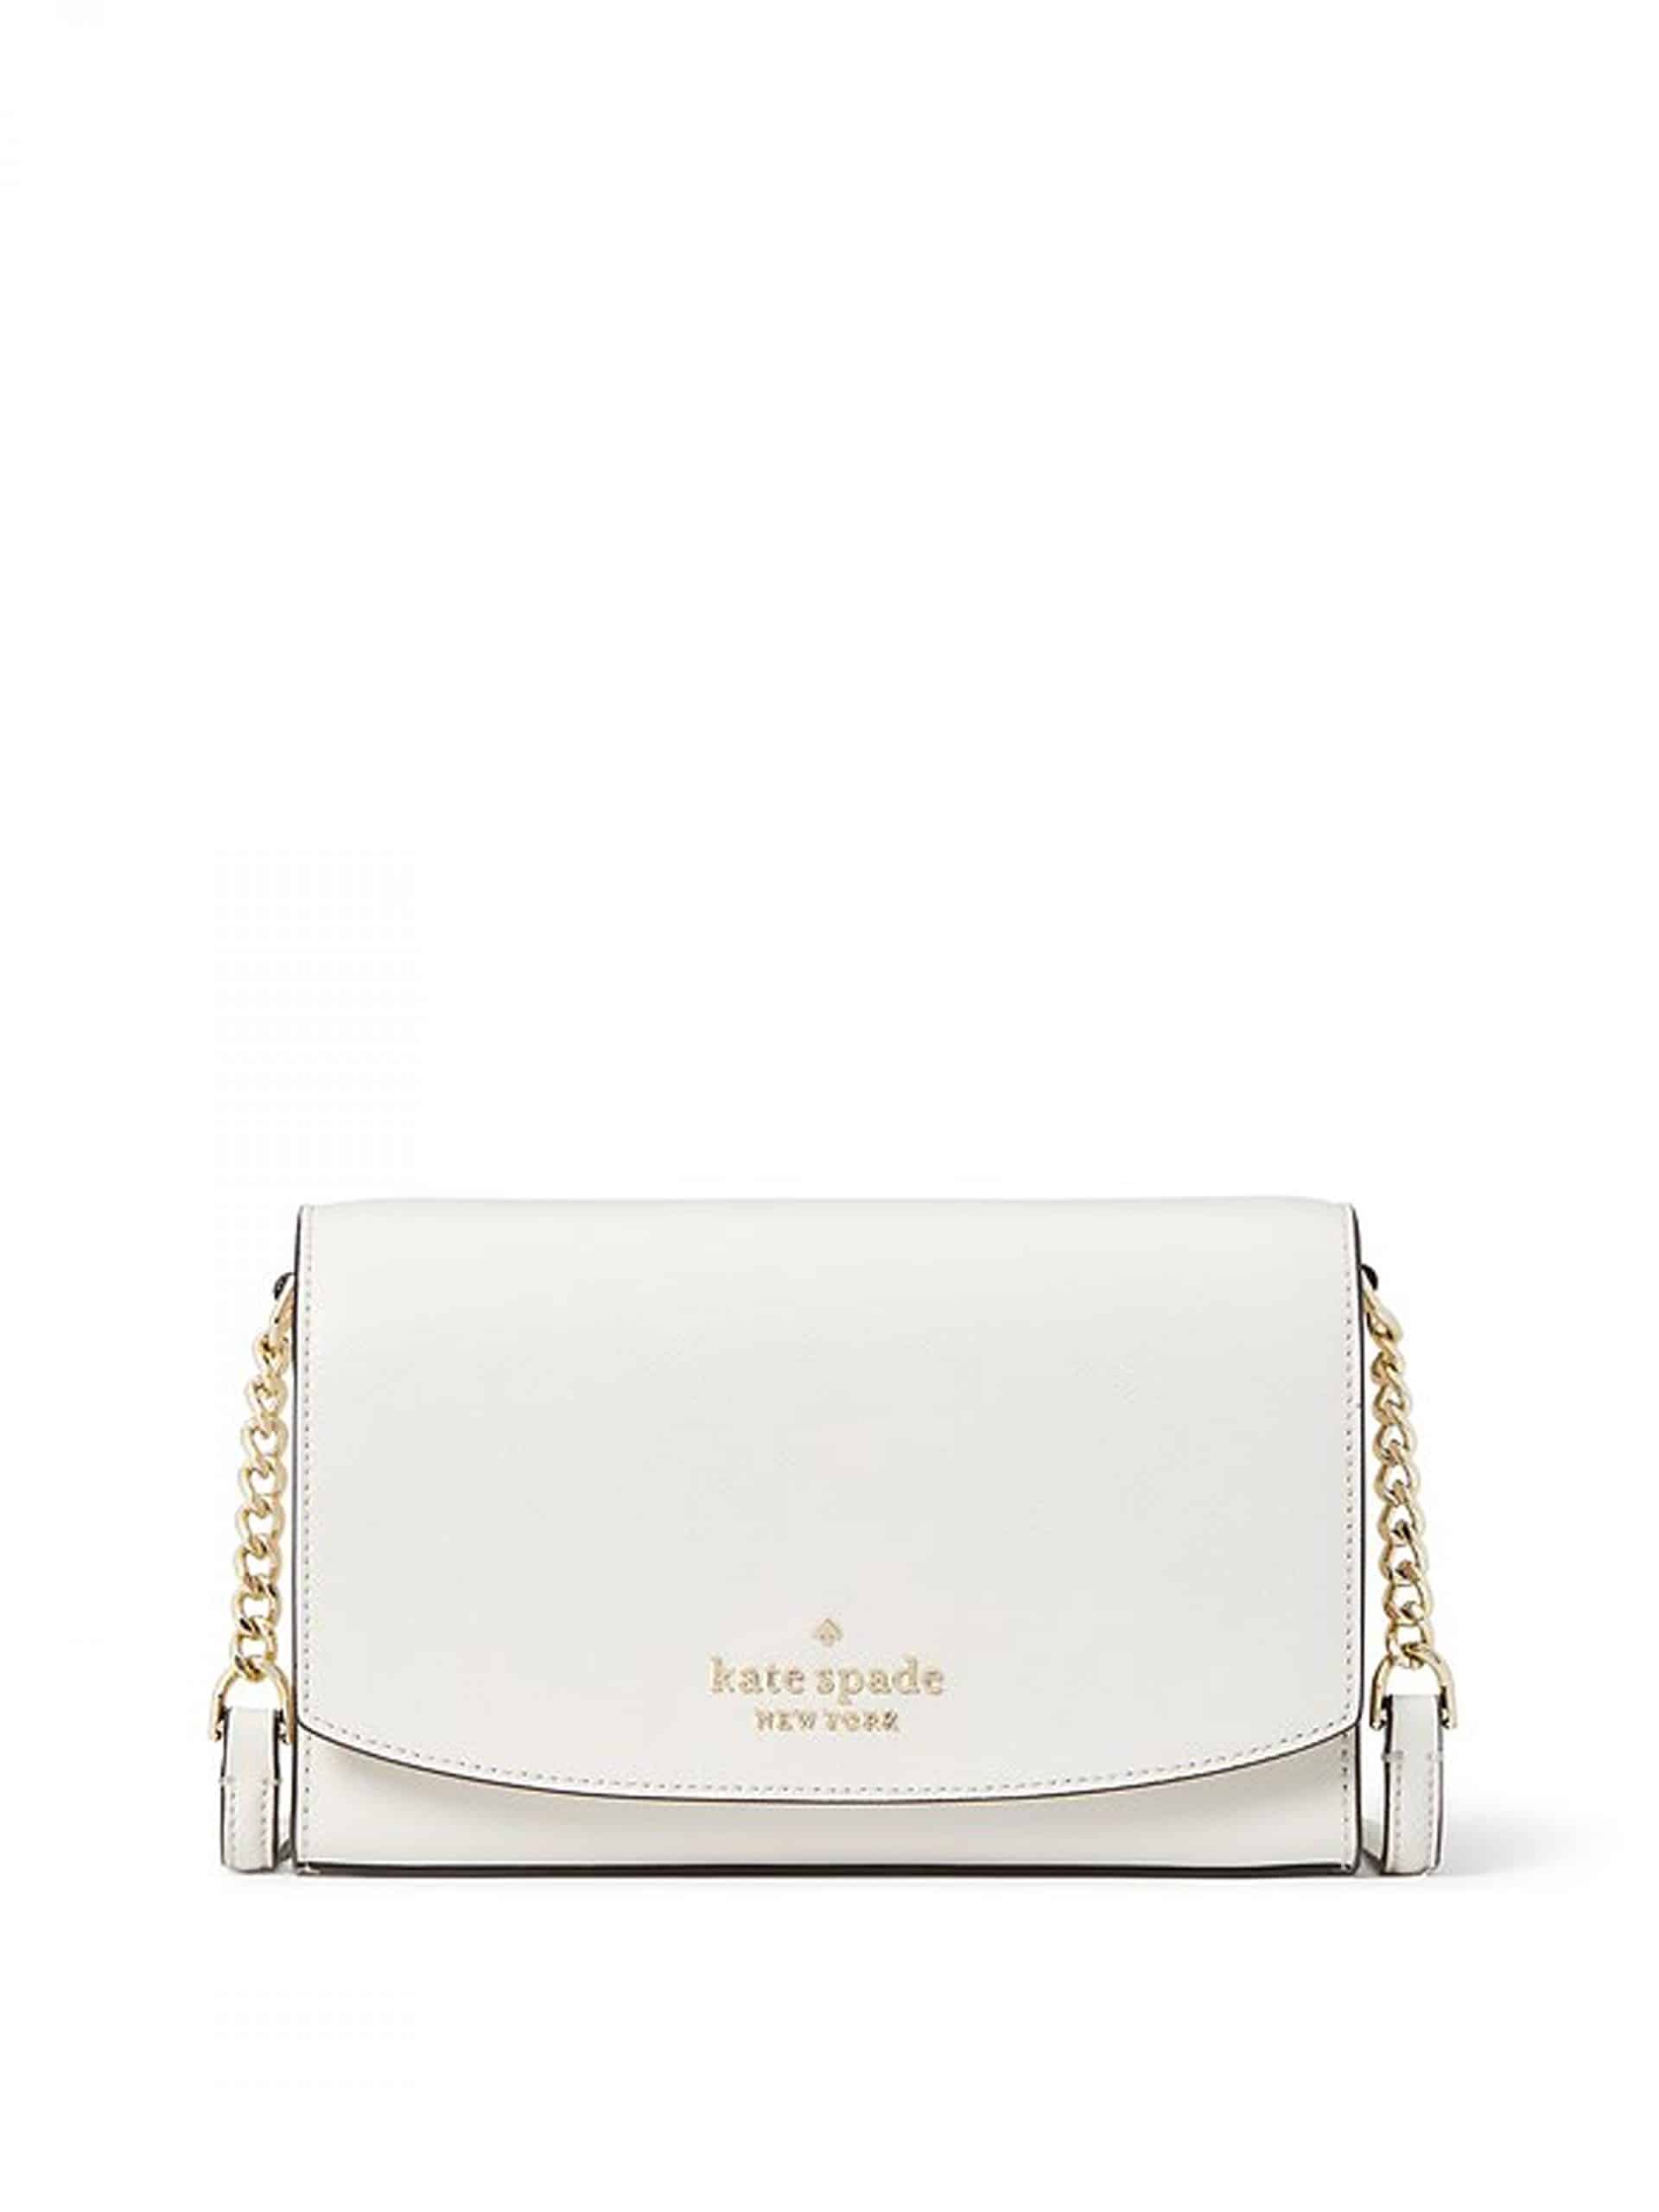 kate spade, Bags, Kate Spade Staci Saffiano Top Handle Square Crossbody  Bag Parchment Wh